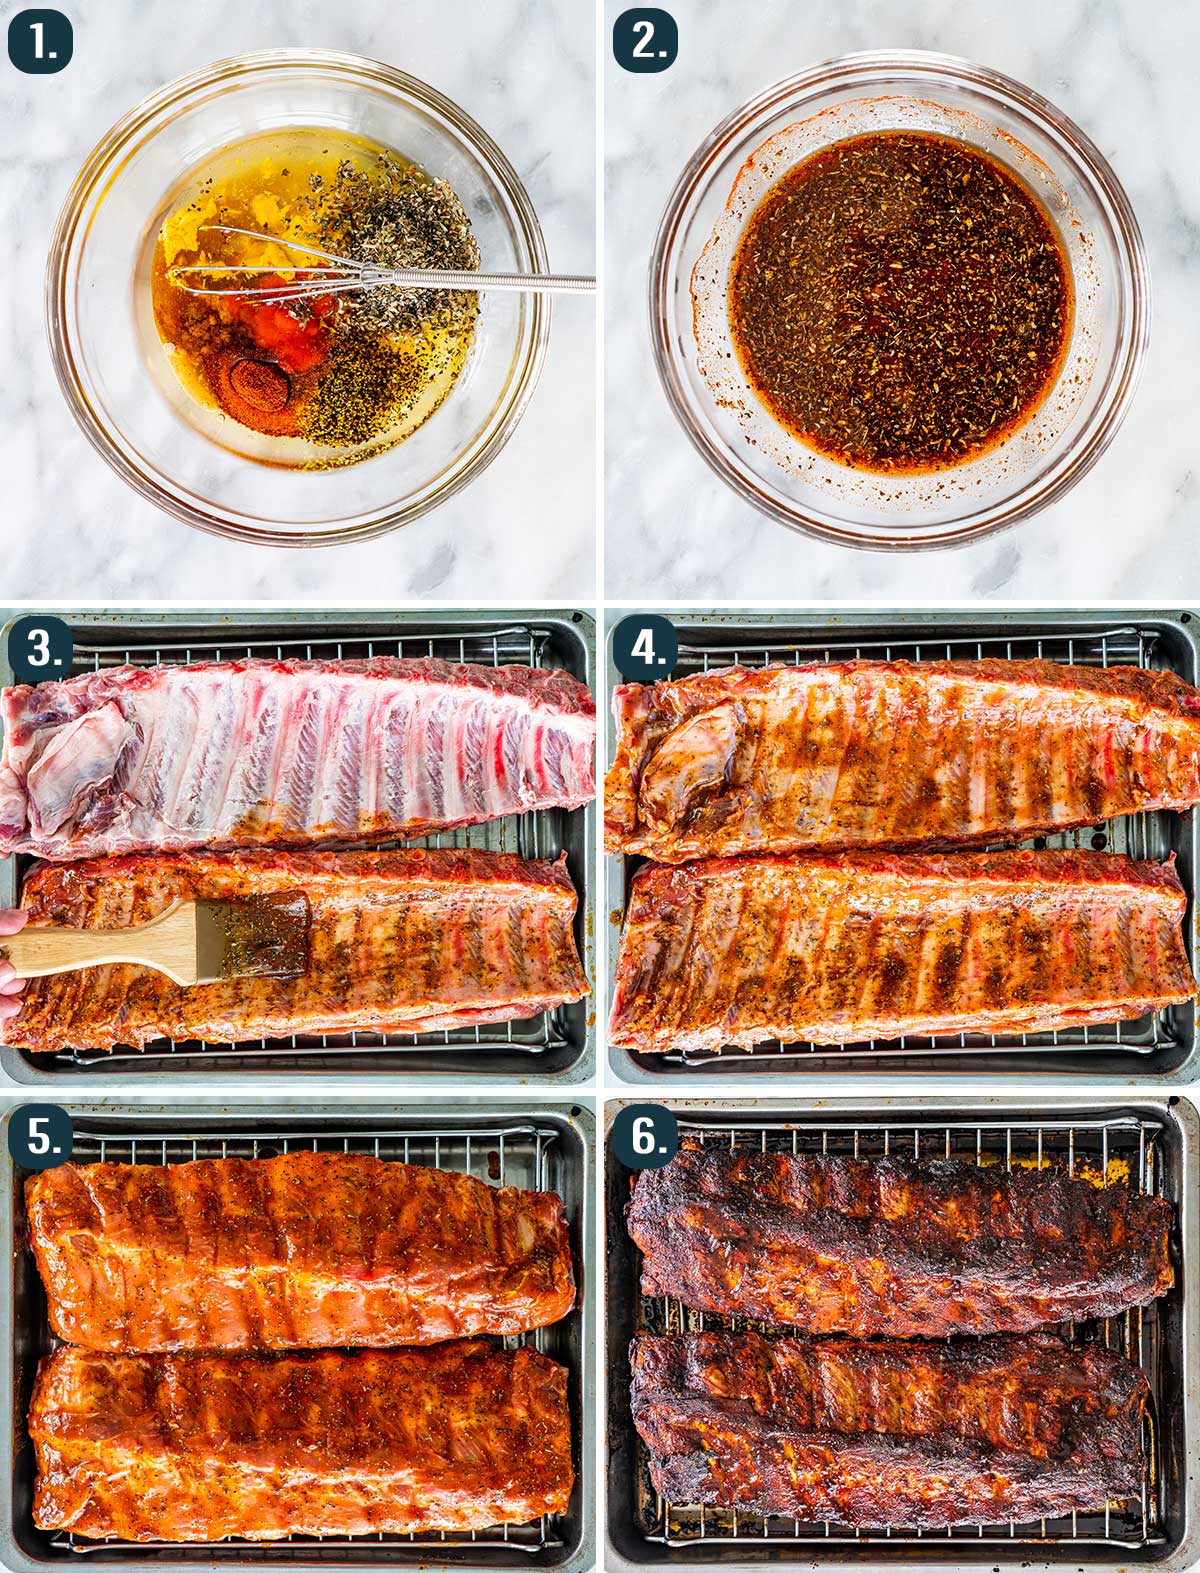 detailed process shots showing how to make honey glazed pork ribs in the oven